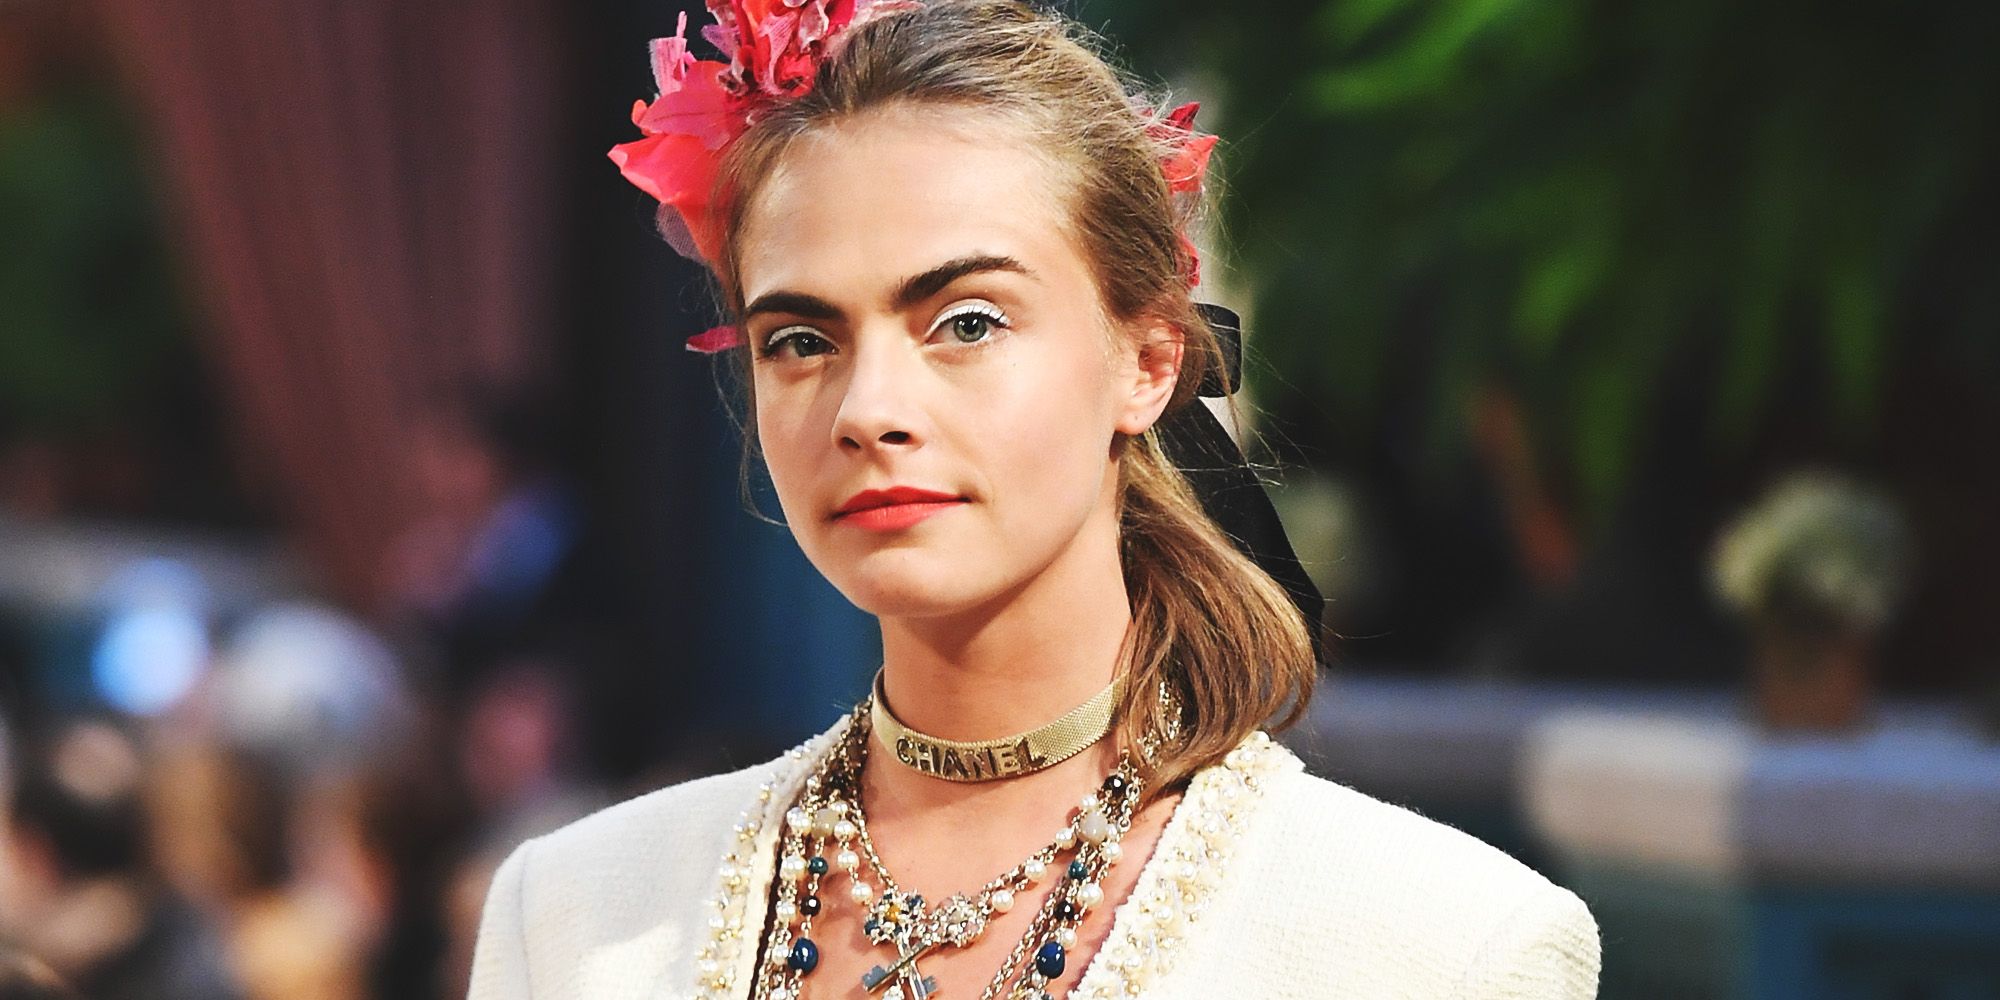 Cara Delevingne to Star in Chanel Gabrielle Bag Campaign - Cara Makes  Campaign Modeling Return